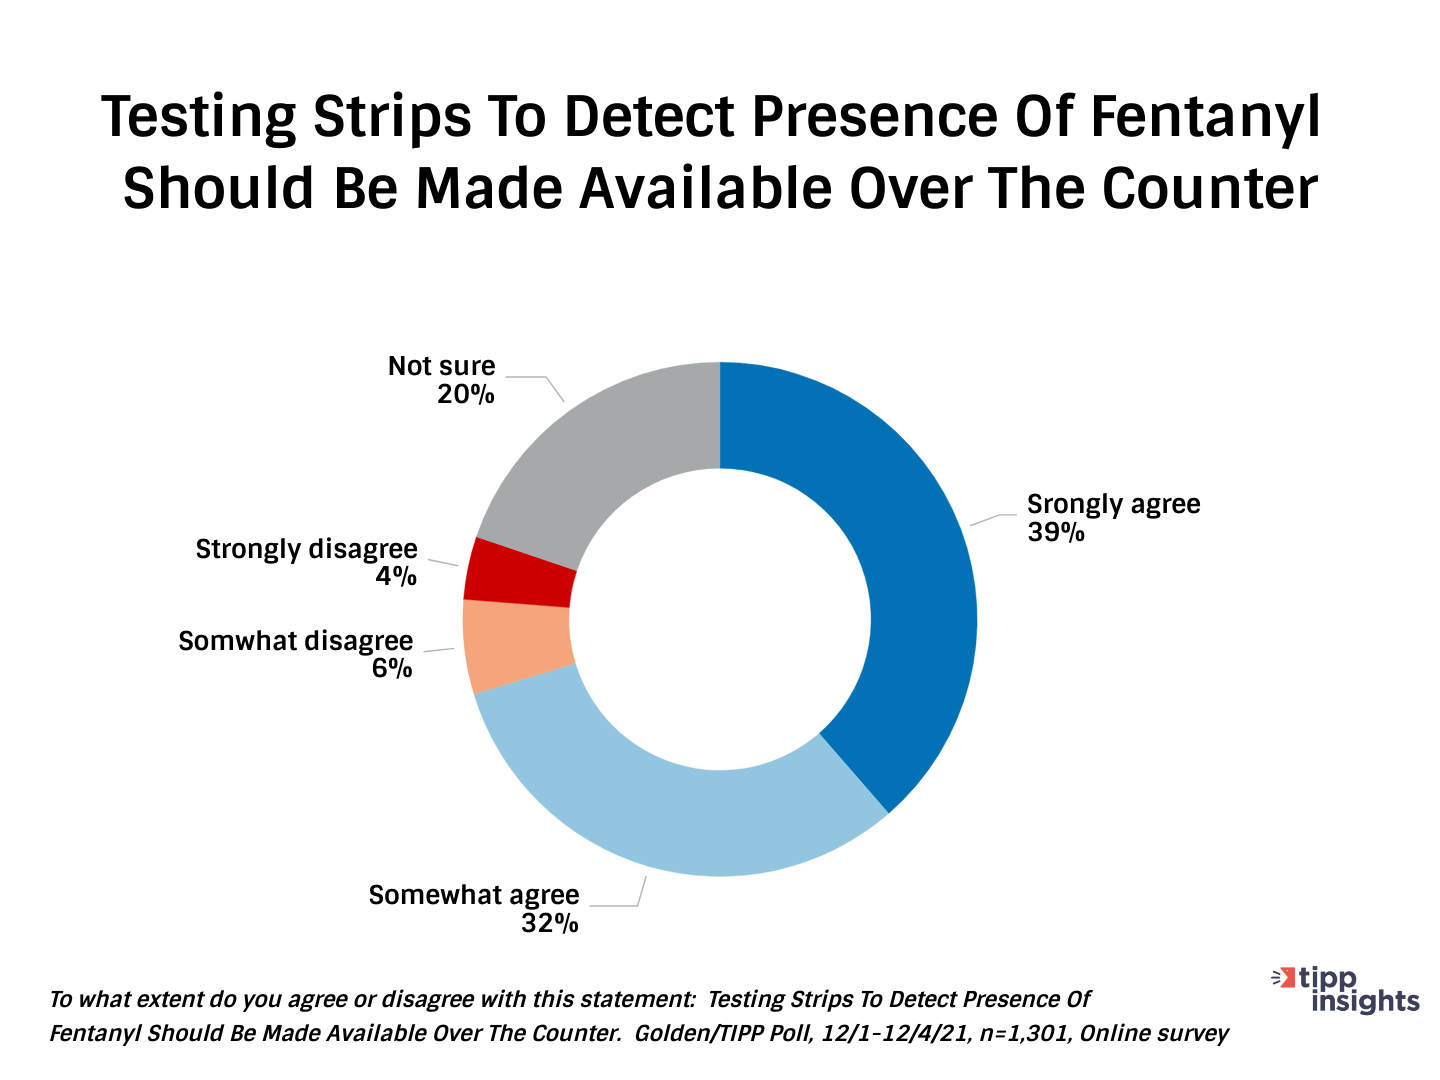 Golden/TIPP Poll: Should fentanyl testing strips be made over the counter?